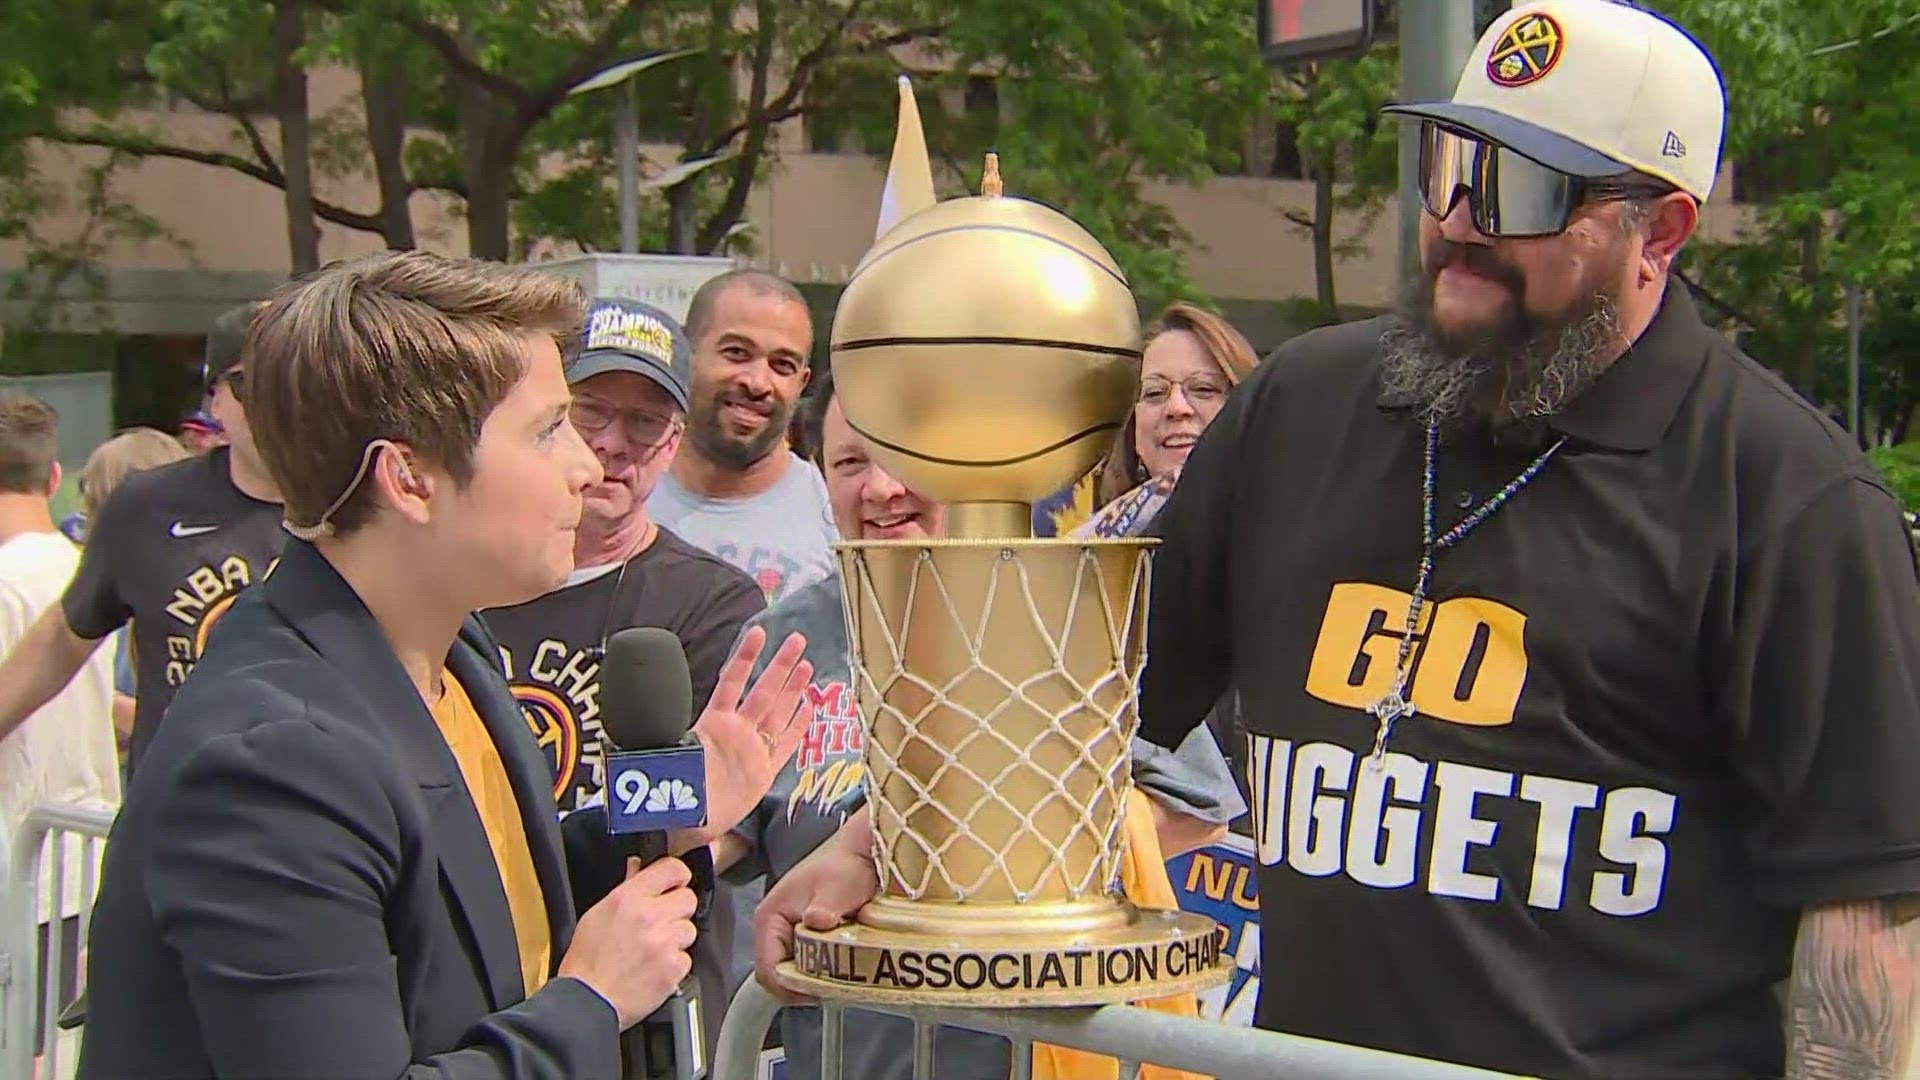 The crafty Denver Nuggets fan used items from thrift stores to make his own version of the Larry O'Brien trophy